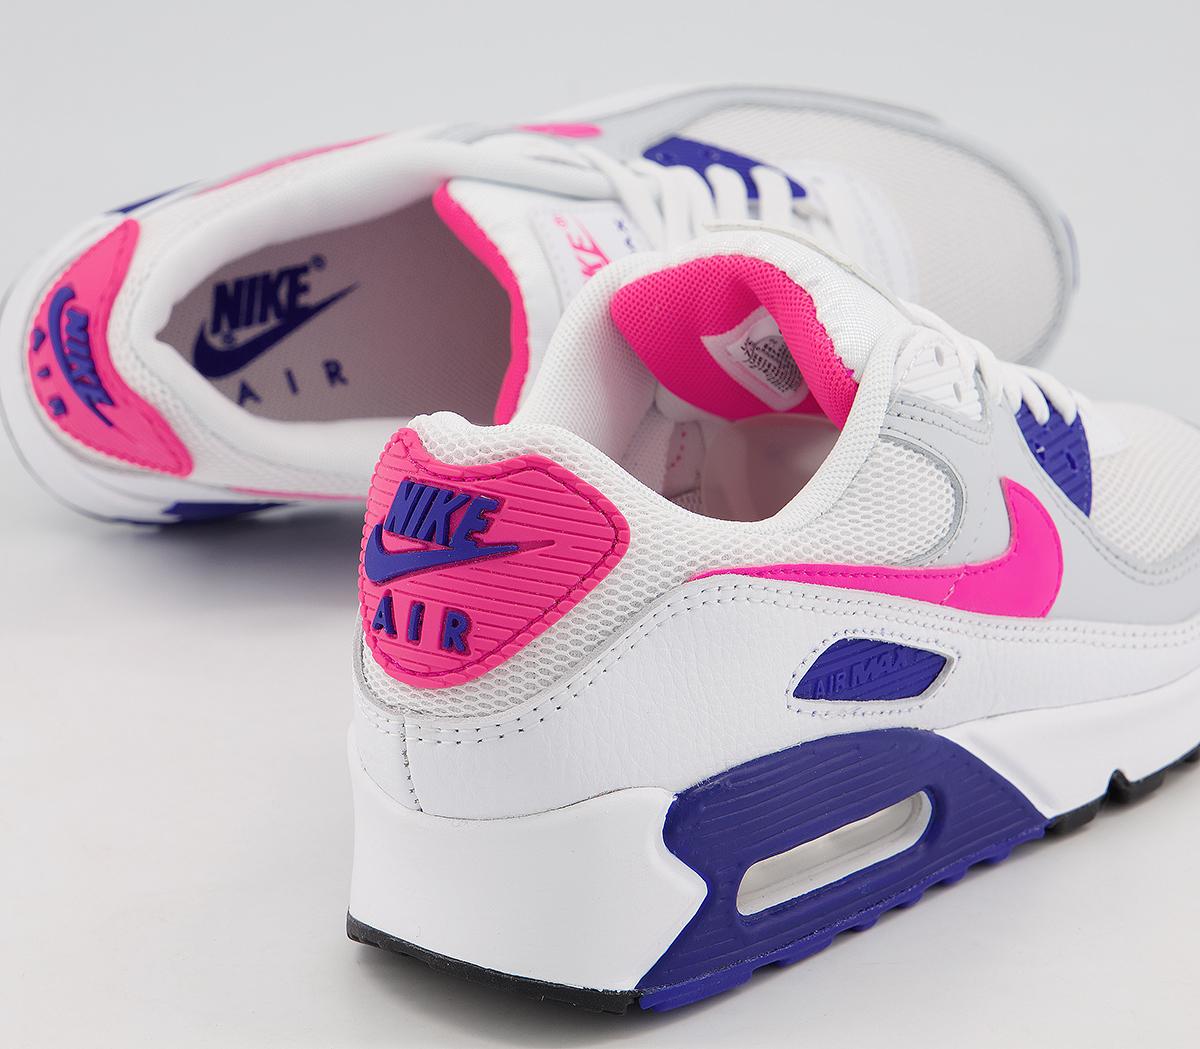 Nike Air Max 90 Trainers White Hyper Pink Concord Pure Platinum - Women ...